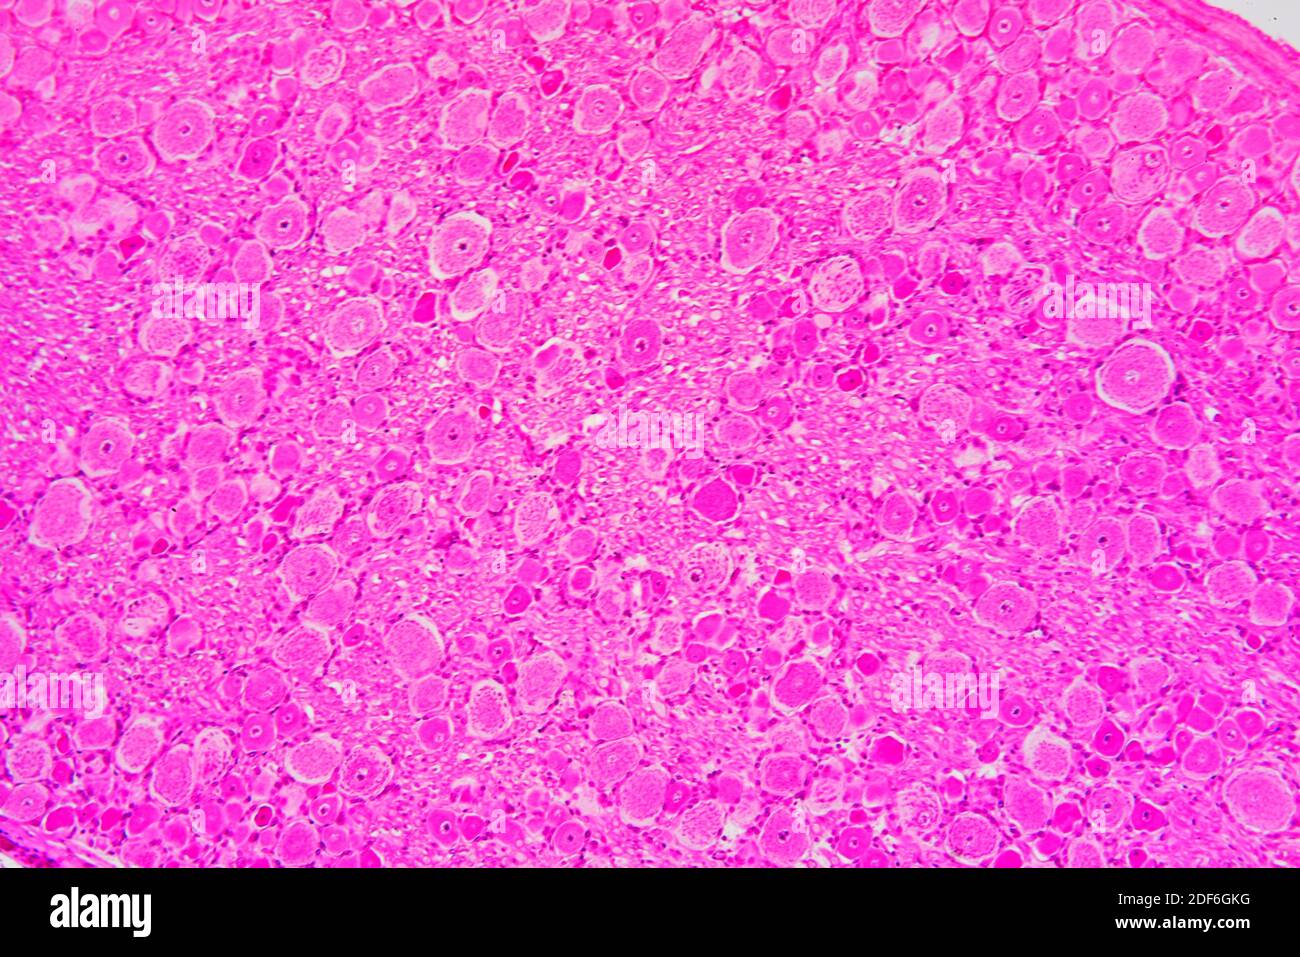 Spinal ganglion cross section. Optical microscope X100. Stock Photo